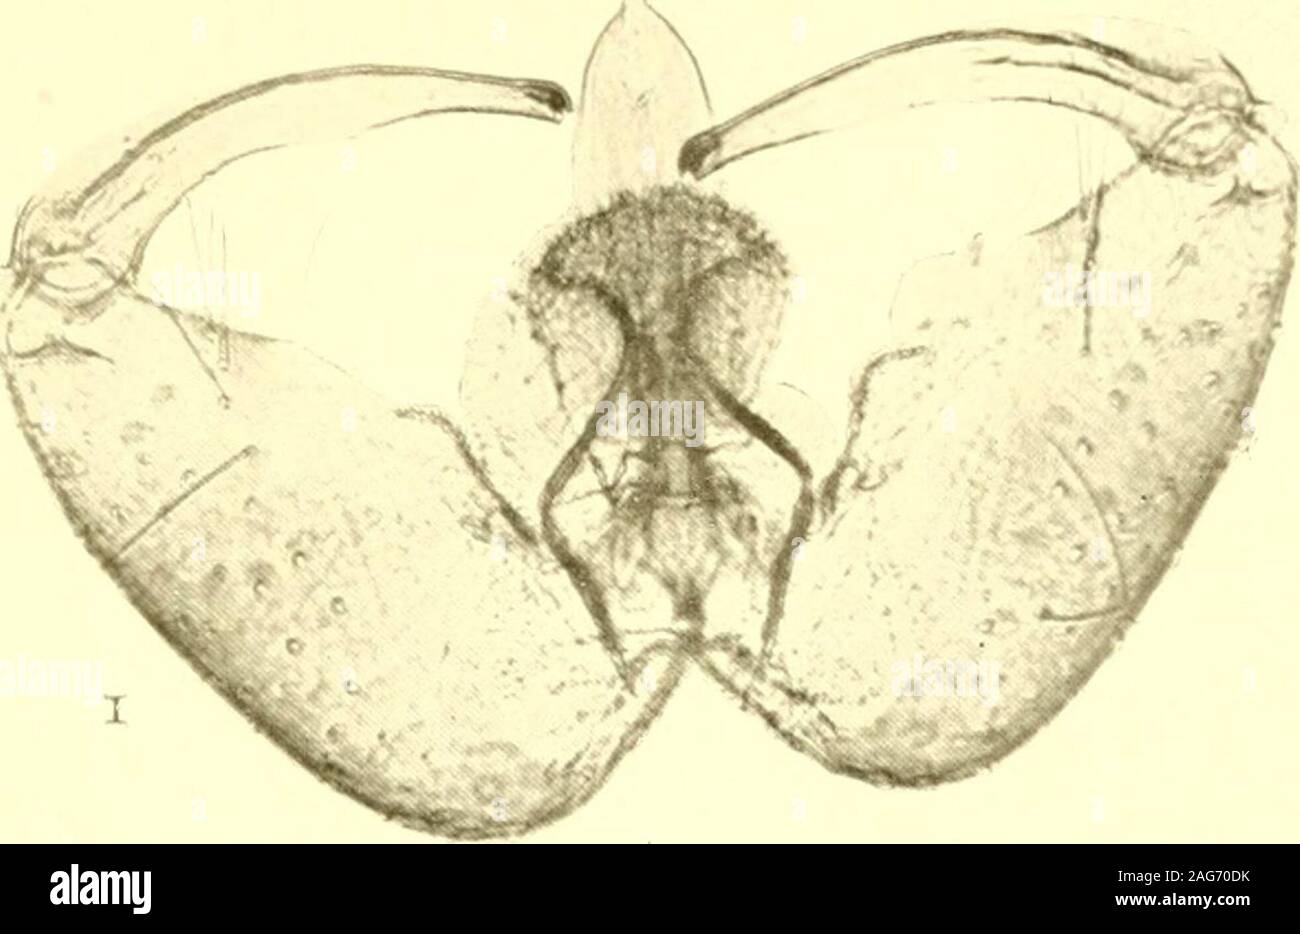 . Report of the State Entomologist on injurious and other insects of the state of New York. PLATE 9223 Gall Midge Genitalia 1 Genitalia of Aphidoletes recurvata Felt, C. 825 X 260 2 Genitalia of Aphidoletes hamamelidis Felt, C. 401 X 260 3 Genitalia of Bremia podophyllae Felt, C. 352 x 260 4 Genitalia of Bremia caricis Felt, C. 292 x 260 5 Genitalia of Contarinia ampelophila Felt, C. 9 x 260 224 Plate g )^^^^^^. Stock Photo